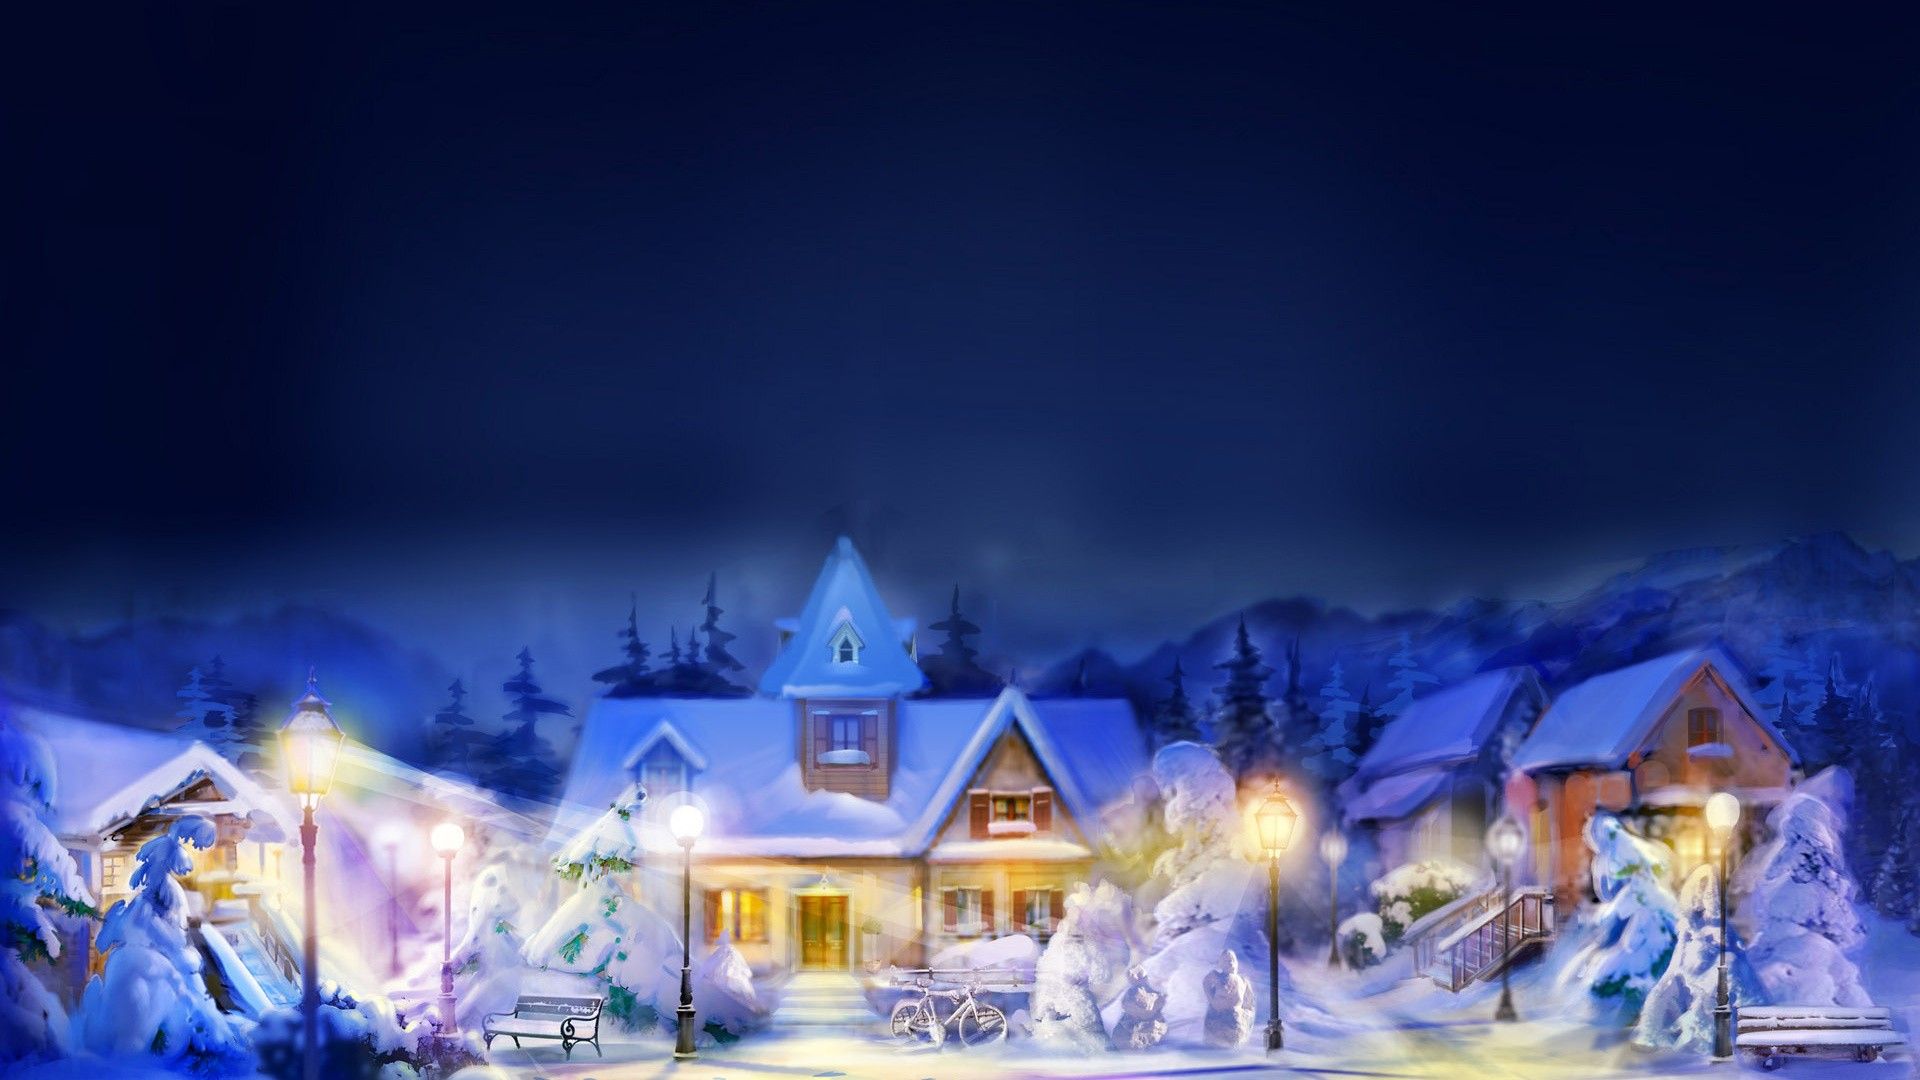 architecture, Building, Digital Art, Painting, Town, House, Snow, Winter, Lights, Blurred, Lamps, Christmas, Bench, Street, Trees, Mountain, Night Wallpaper HD / Desktop and Mobile Background